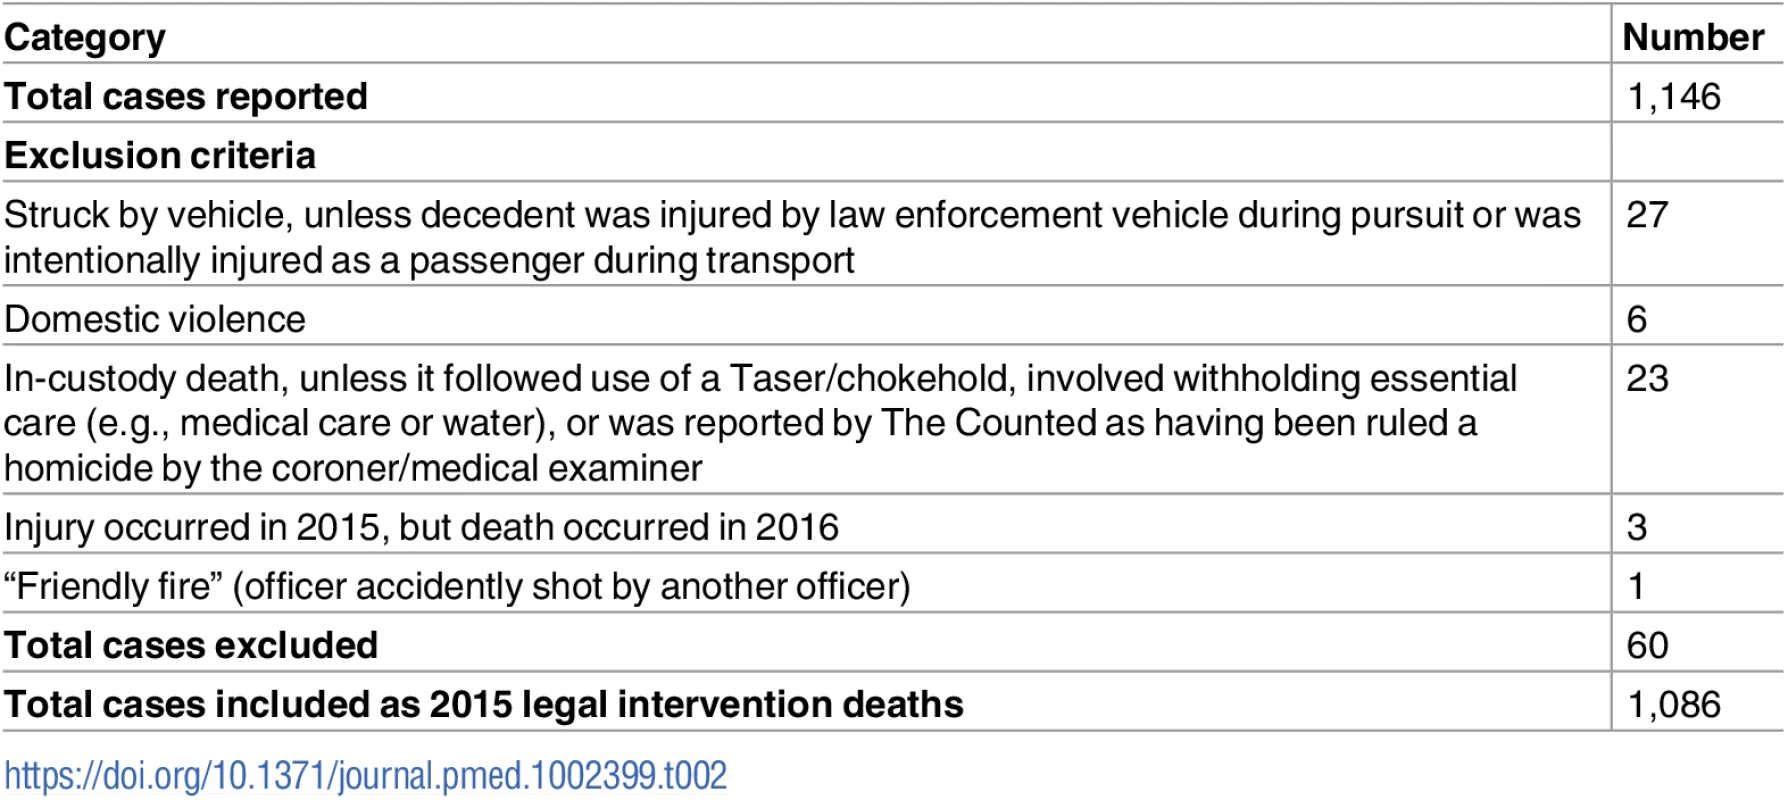 Cases included and excluded as legal intervention deaths from The Guardian’s The Counted database of law-enforcement-related deaths (US, 2015).